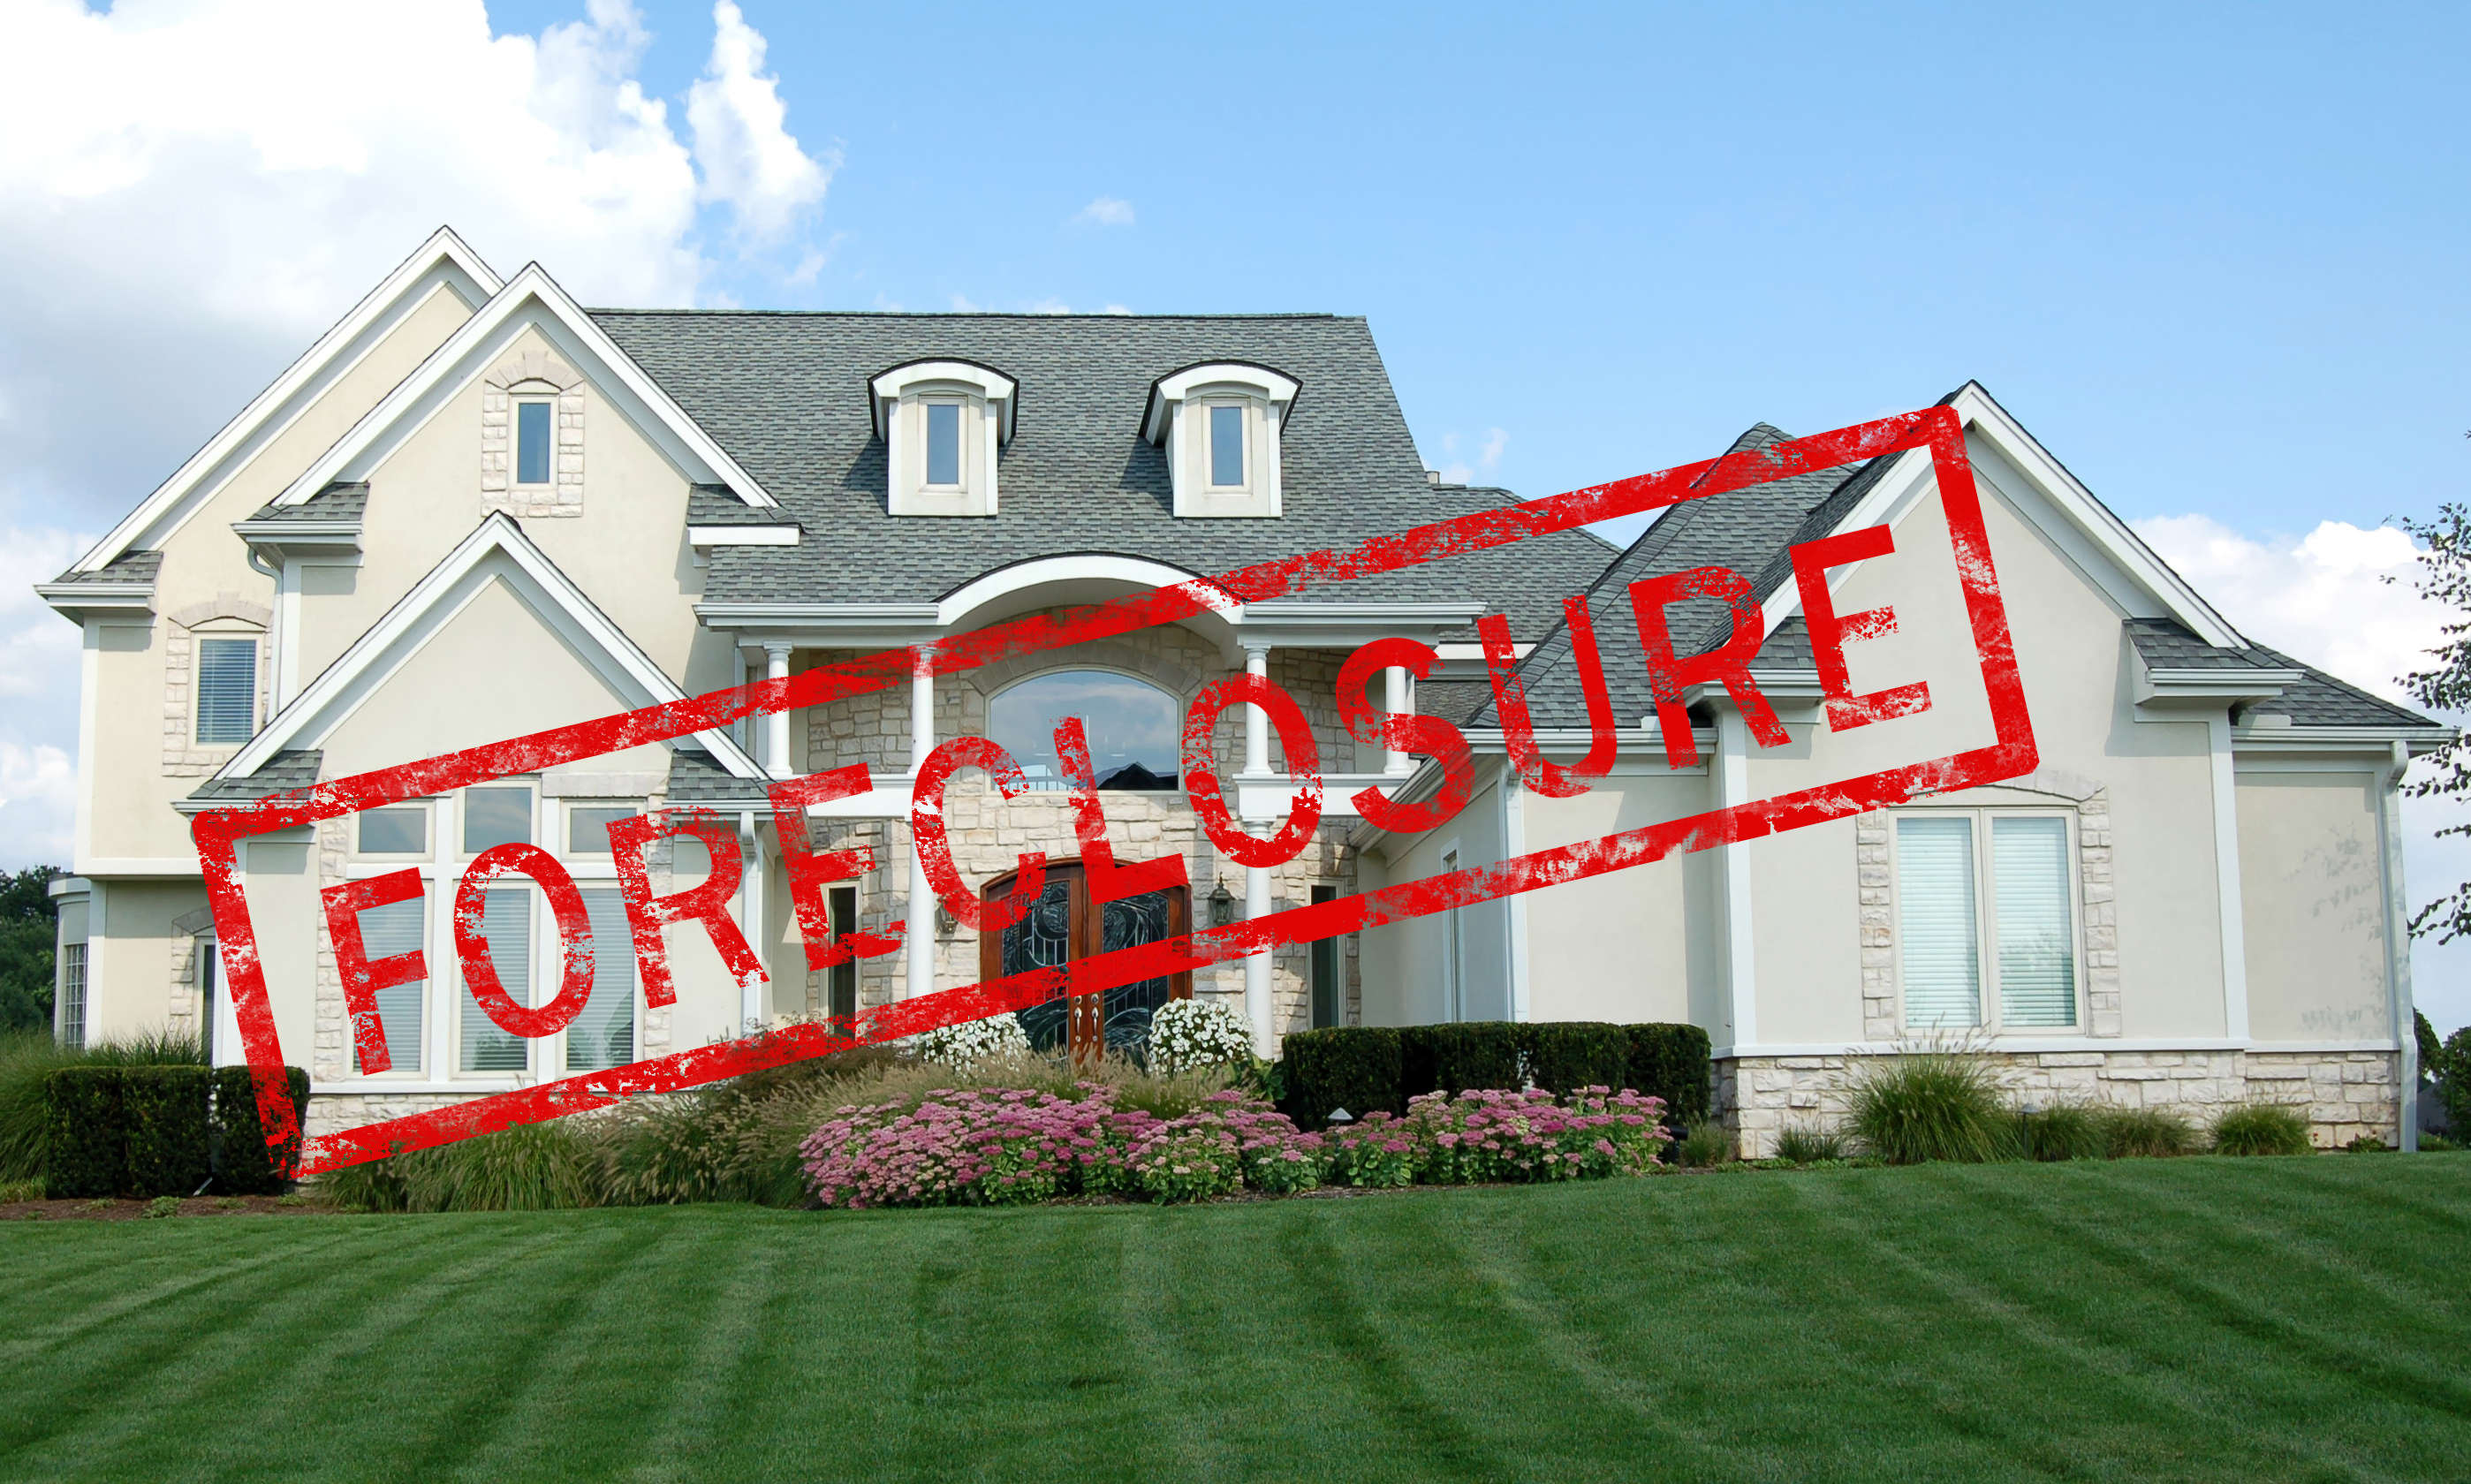 Call Lundquist Appraisals & Real Estate Services when you need appraisals regarding Wabash foreclosures